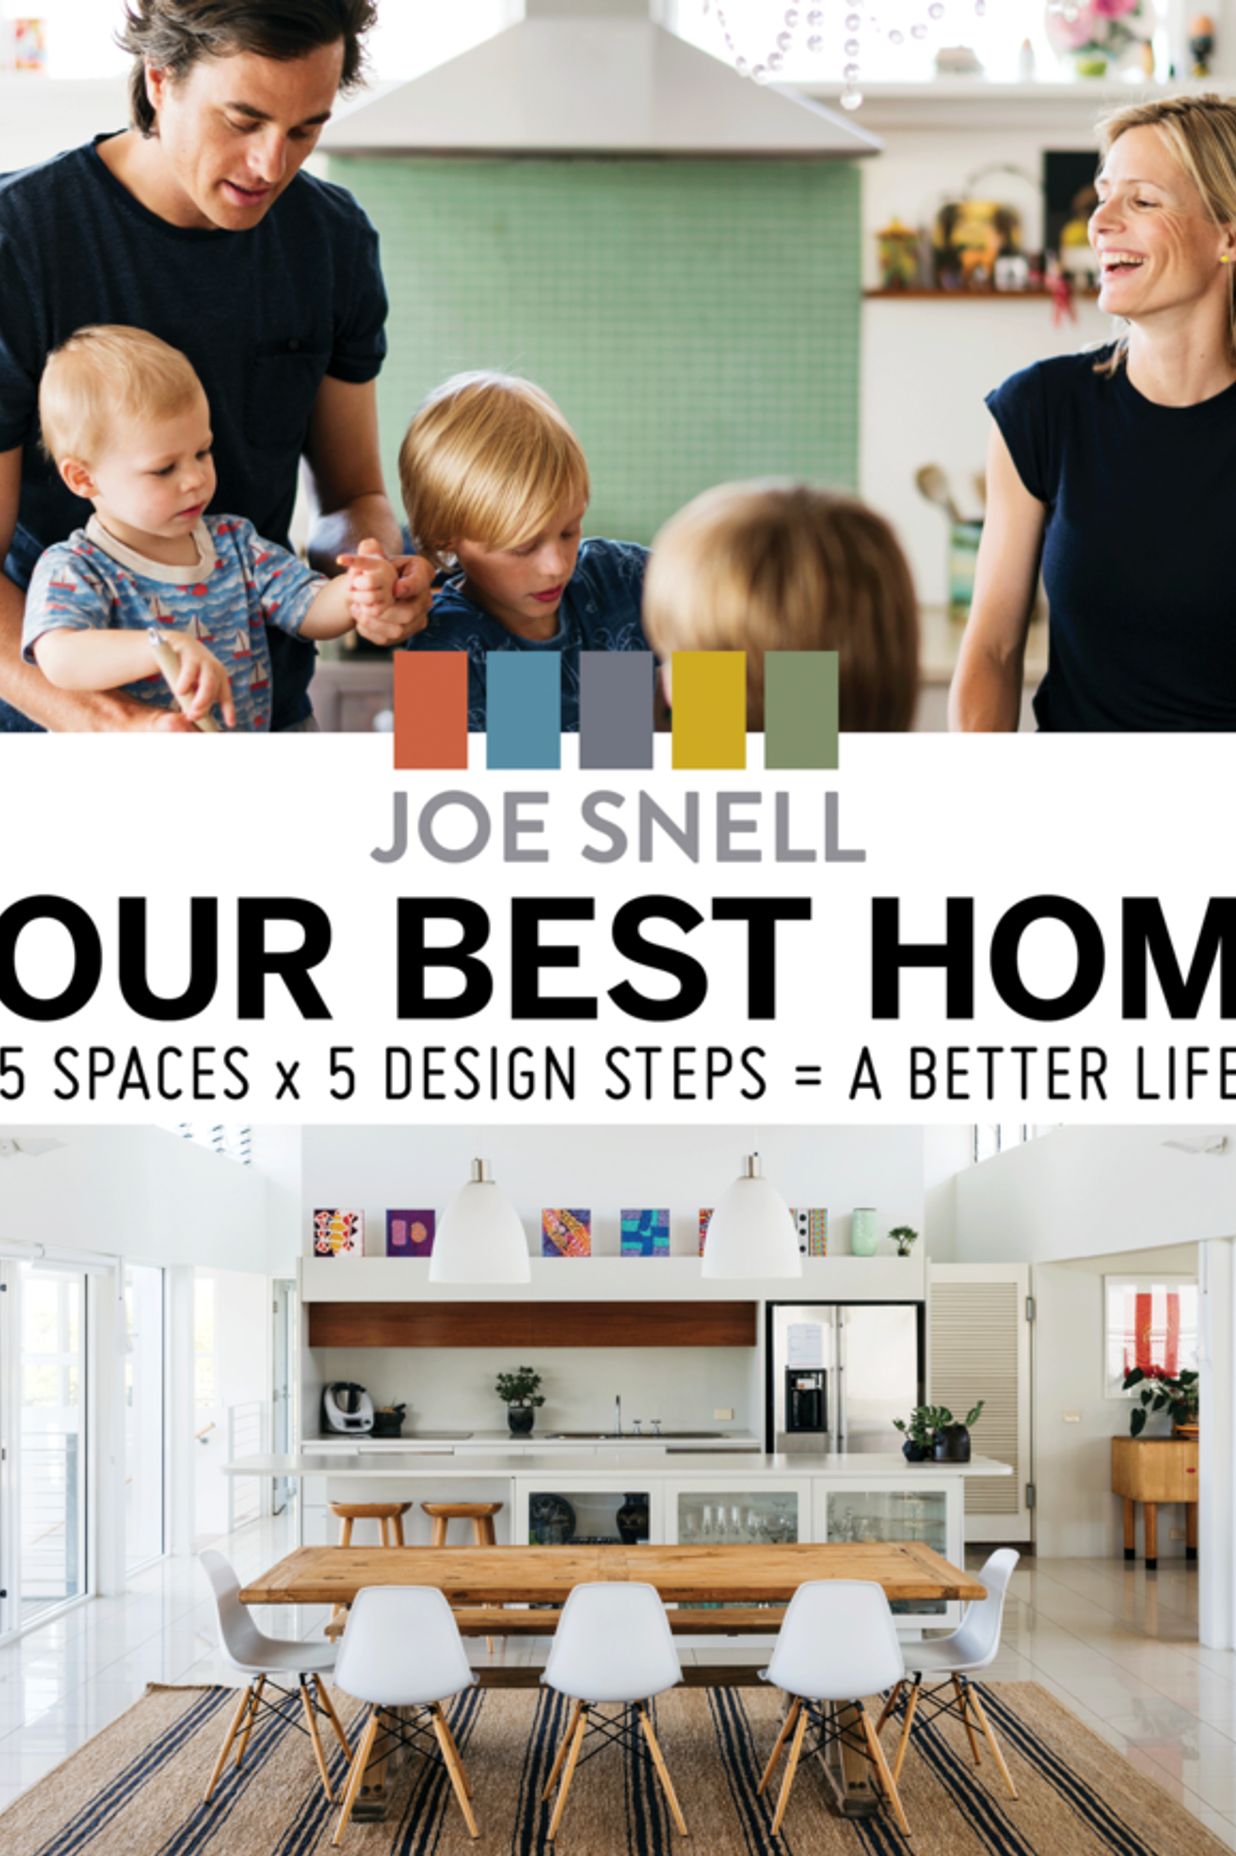 Your Best Home book by Joe Snell